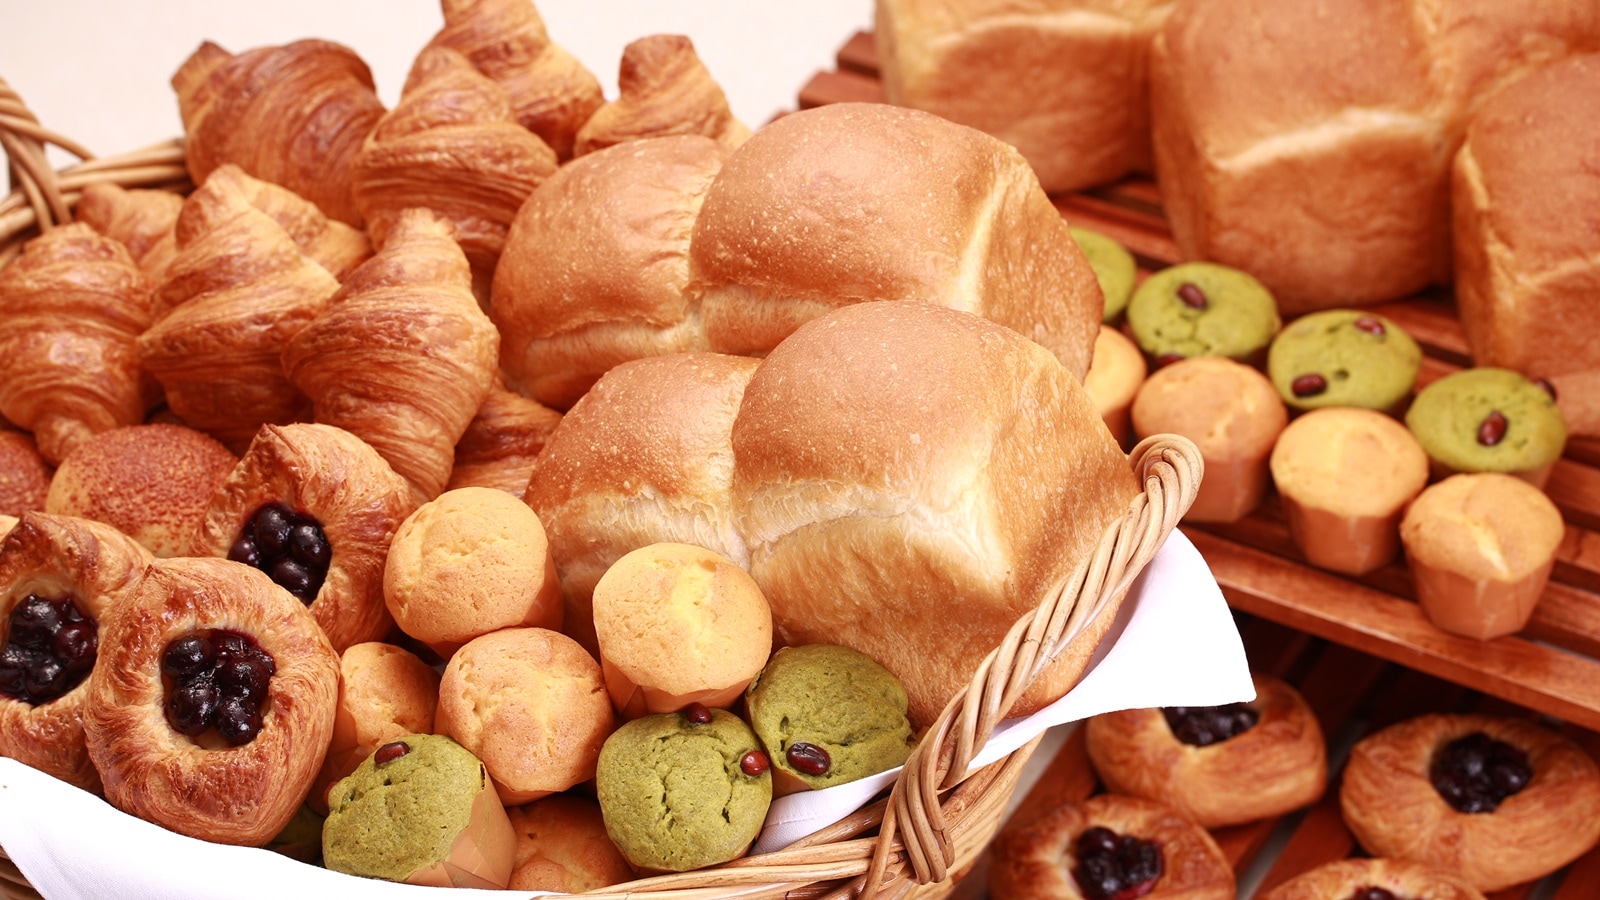 [Breakfast] Enjoy the bread baked by the pastry chef every morning.